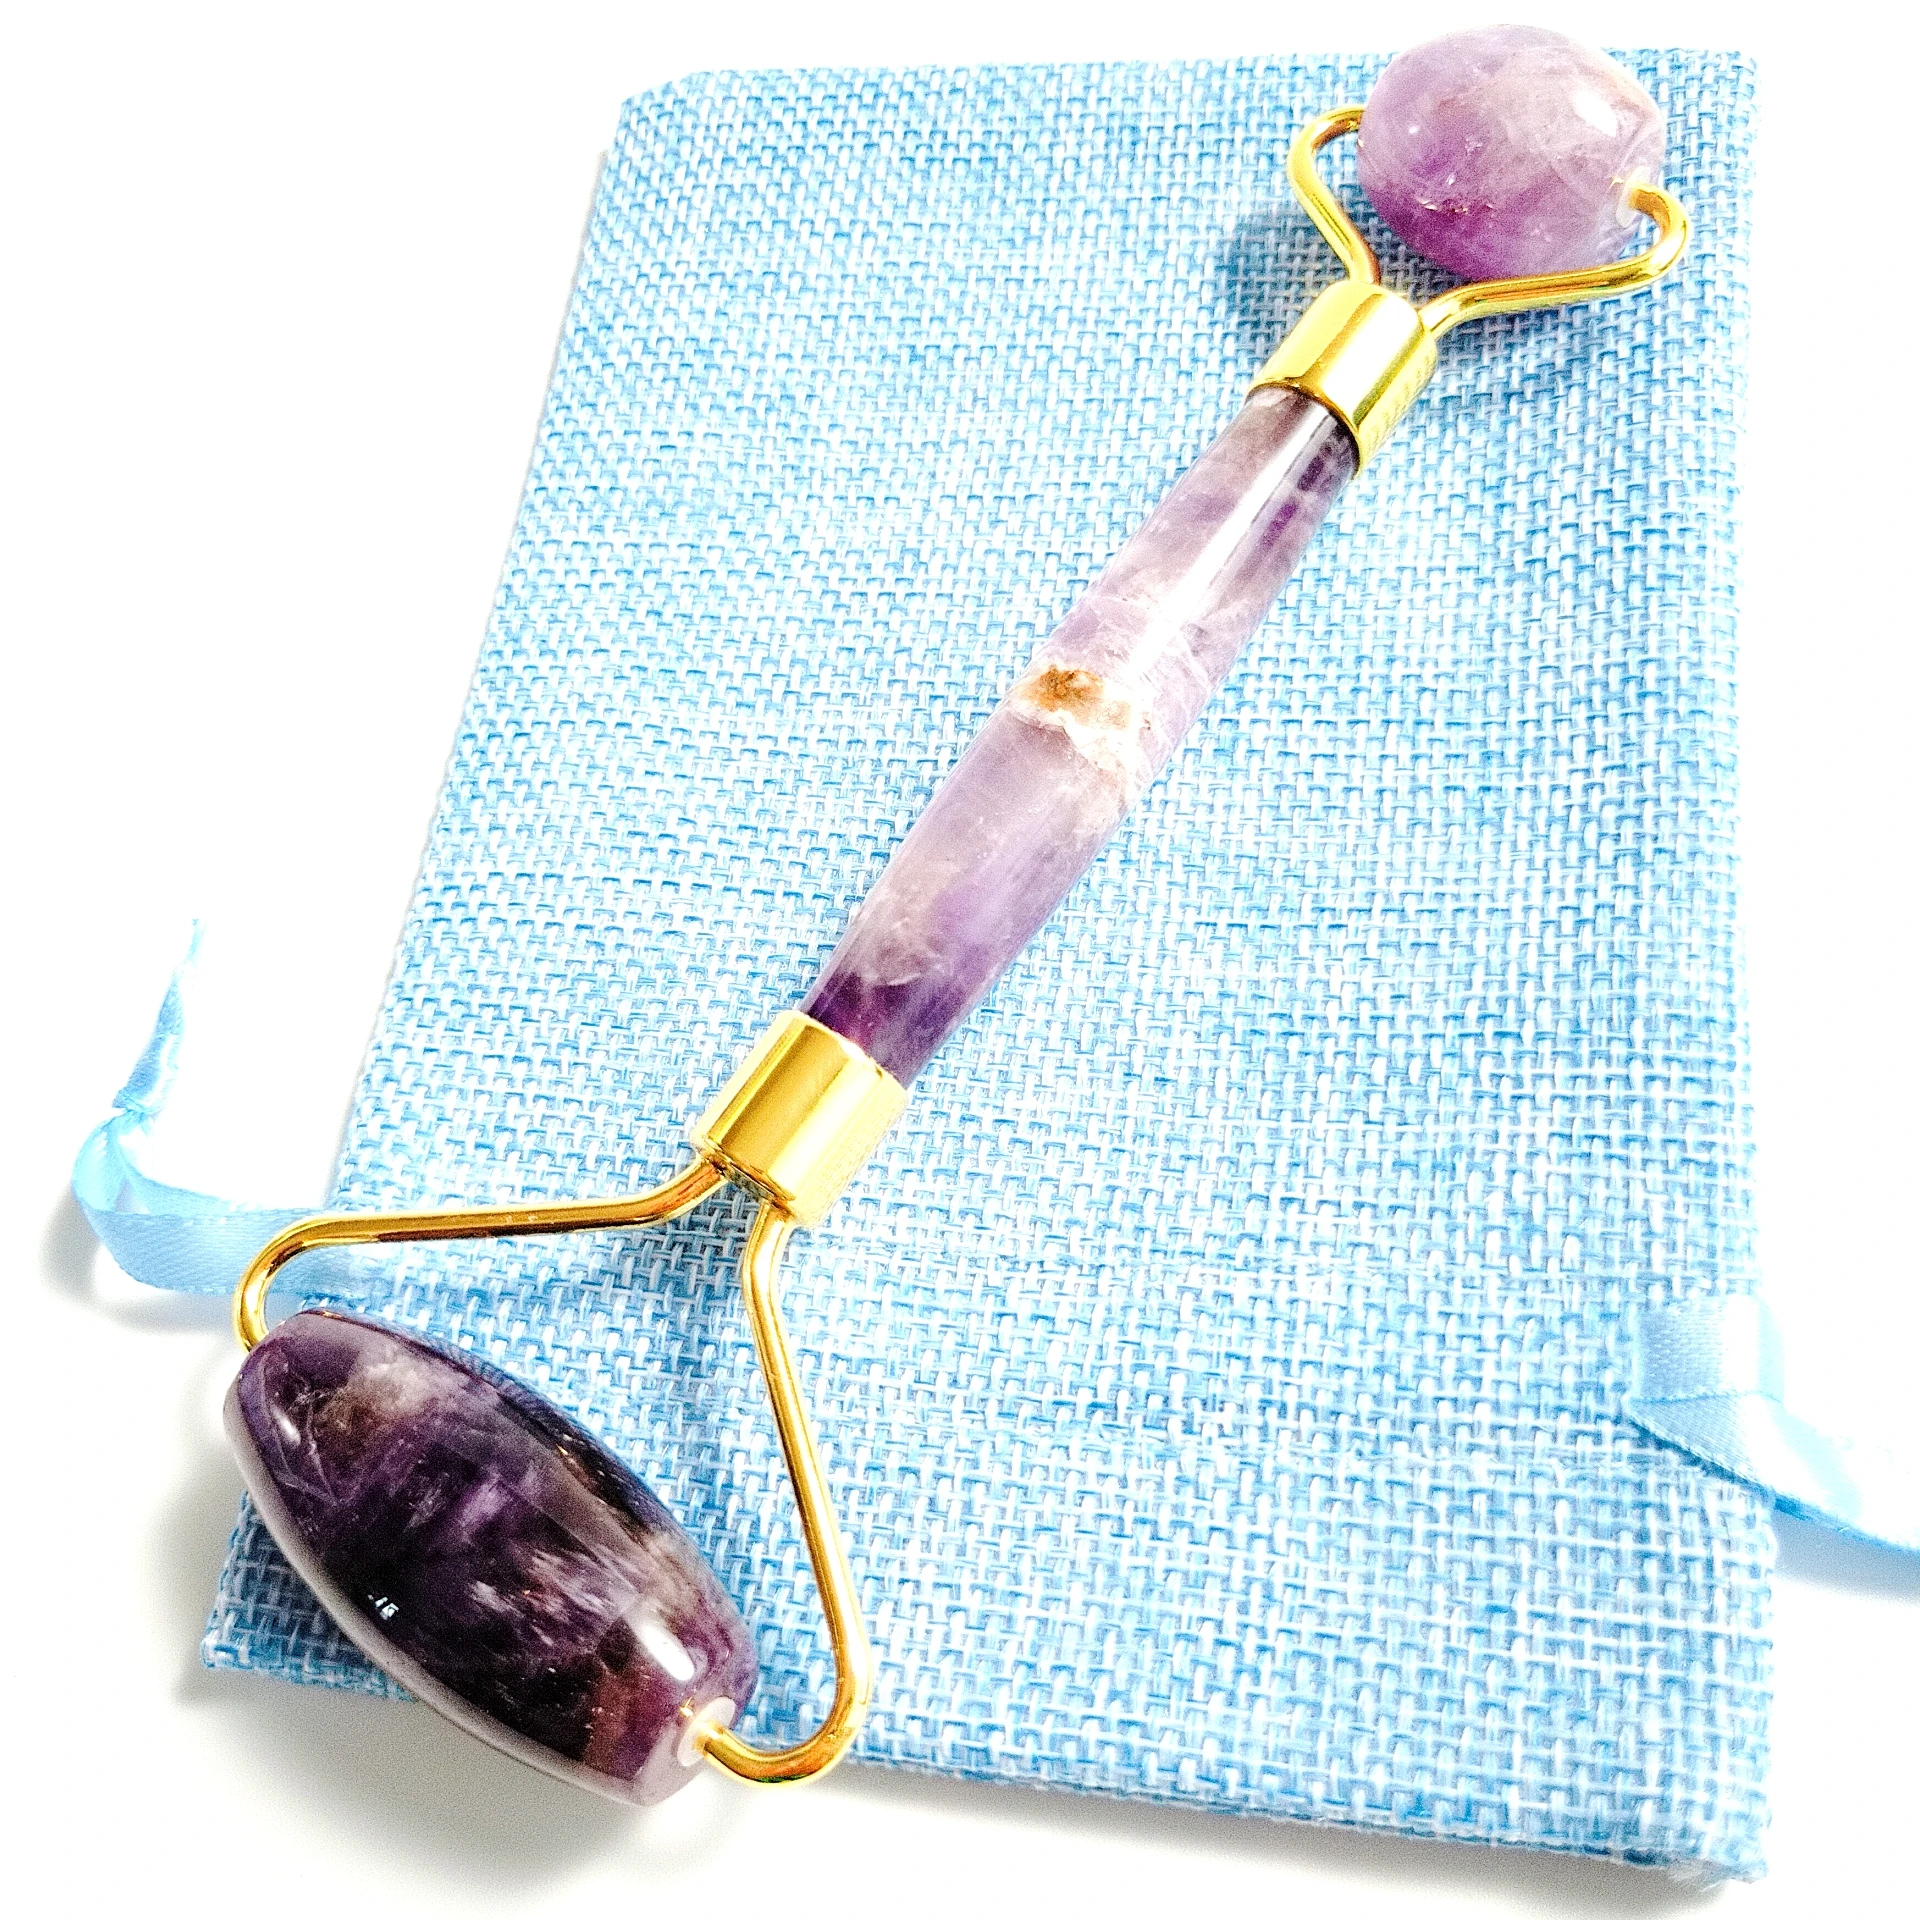 

Dual Sided Amethyst Facial Beauty Roller - Promotes Circulation